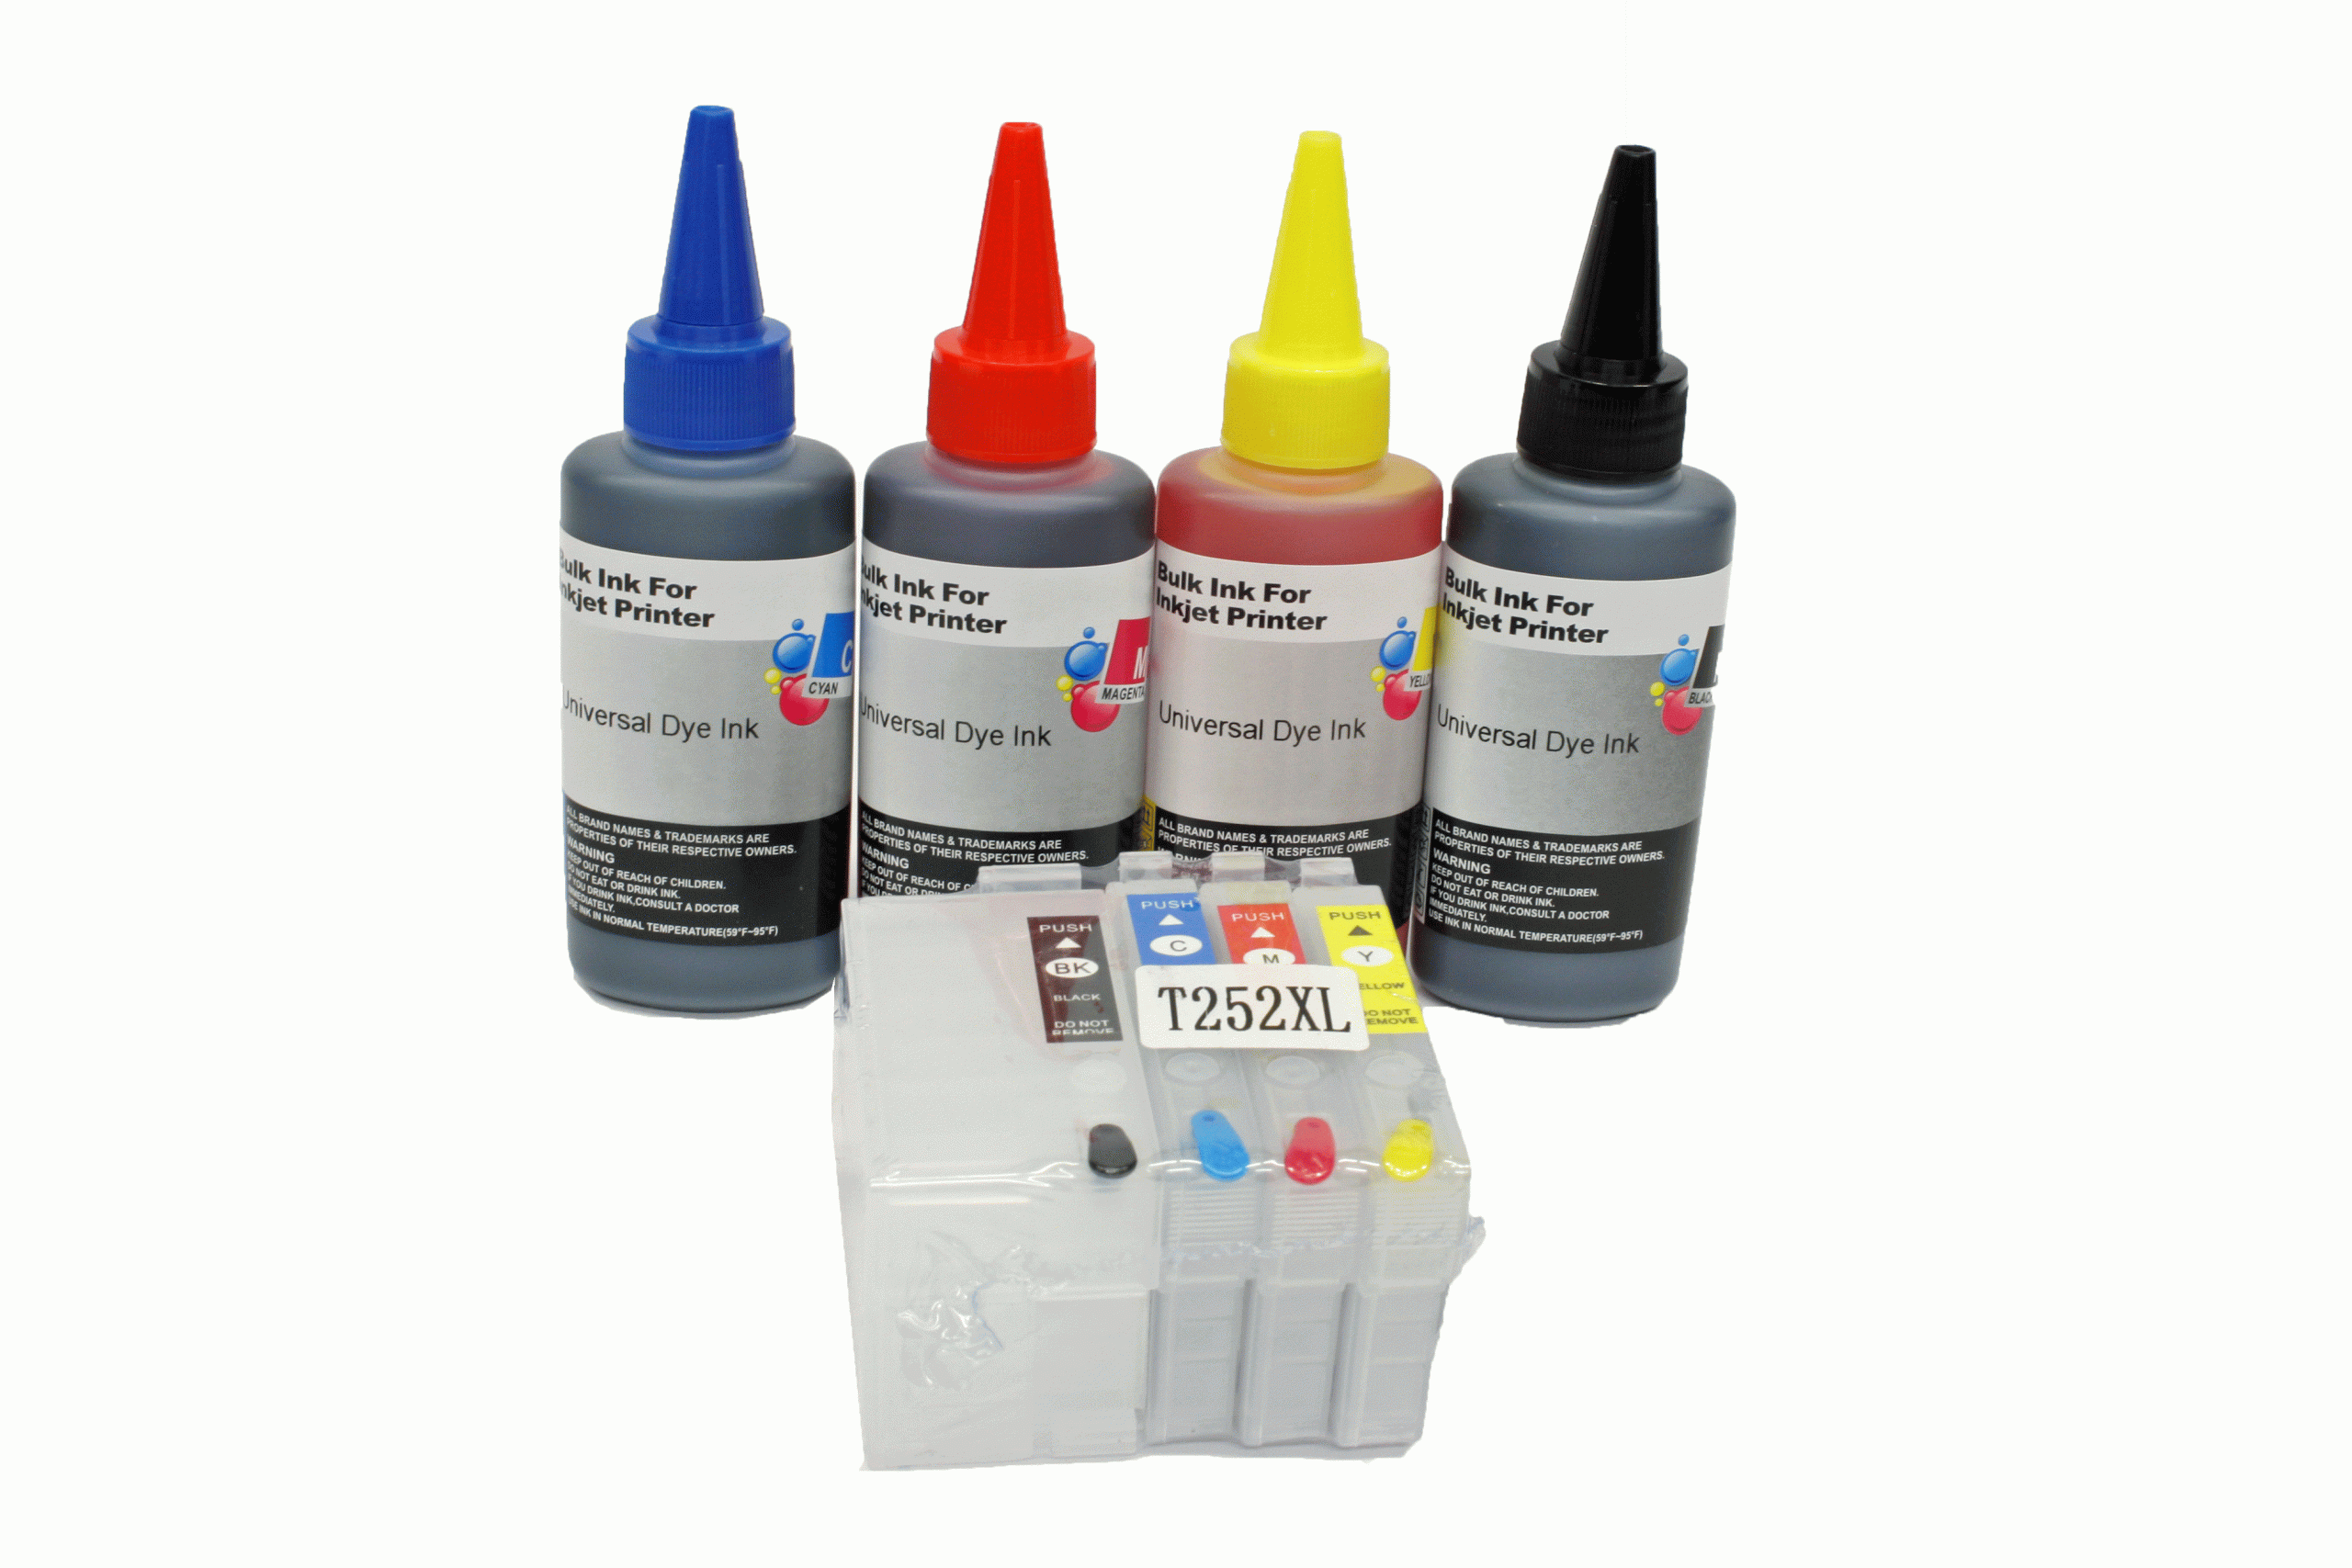 Refillable Epson T252xl Set Of 4 With Ink Refillink 4217